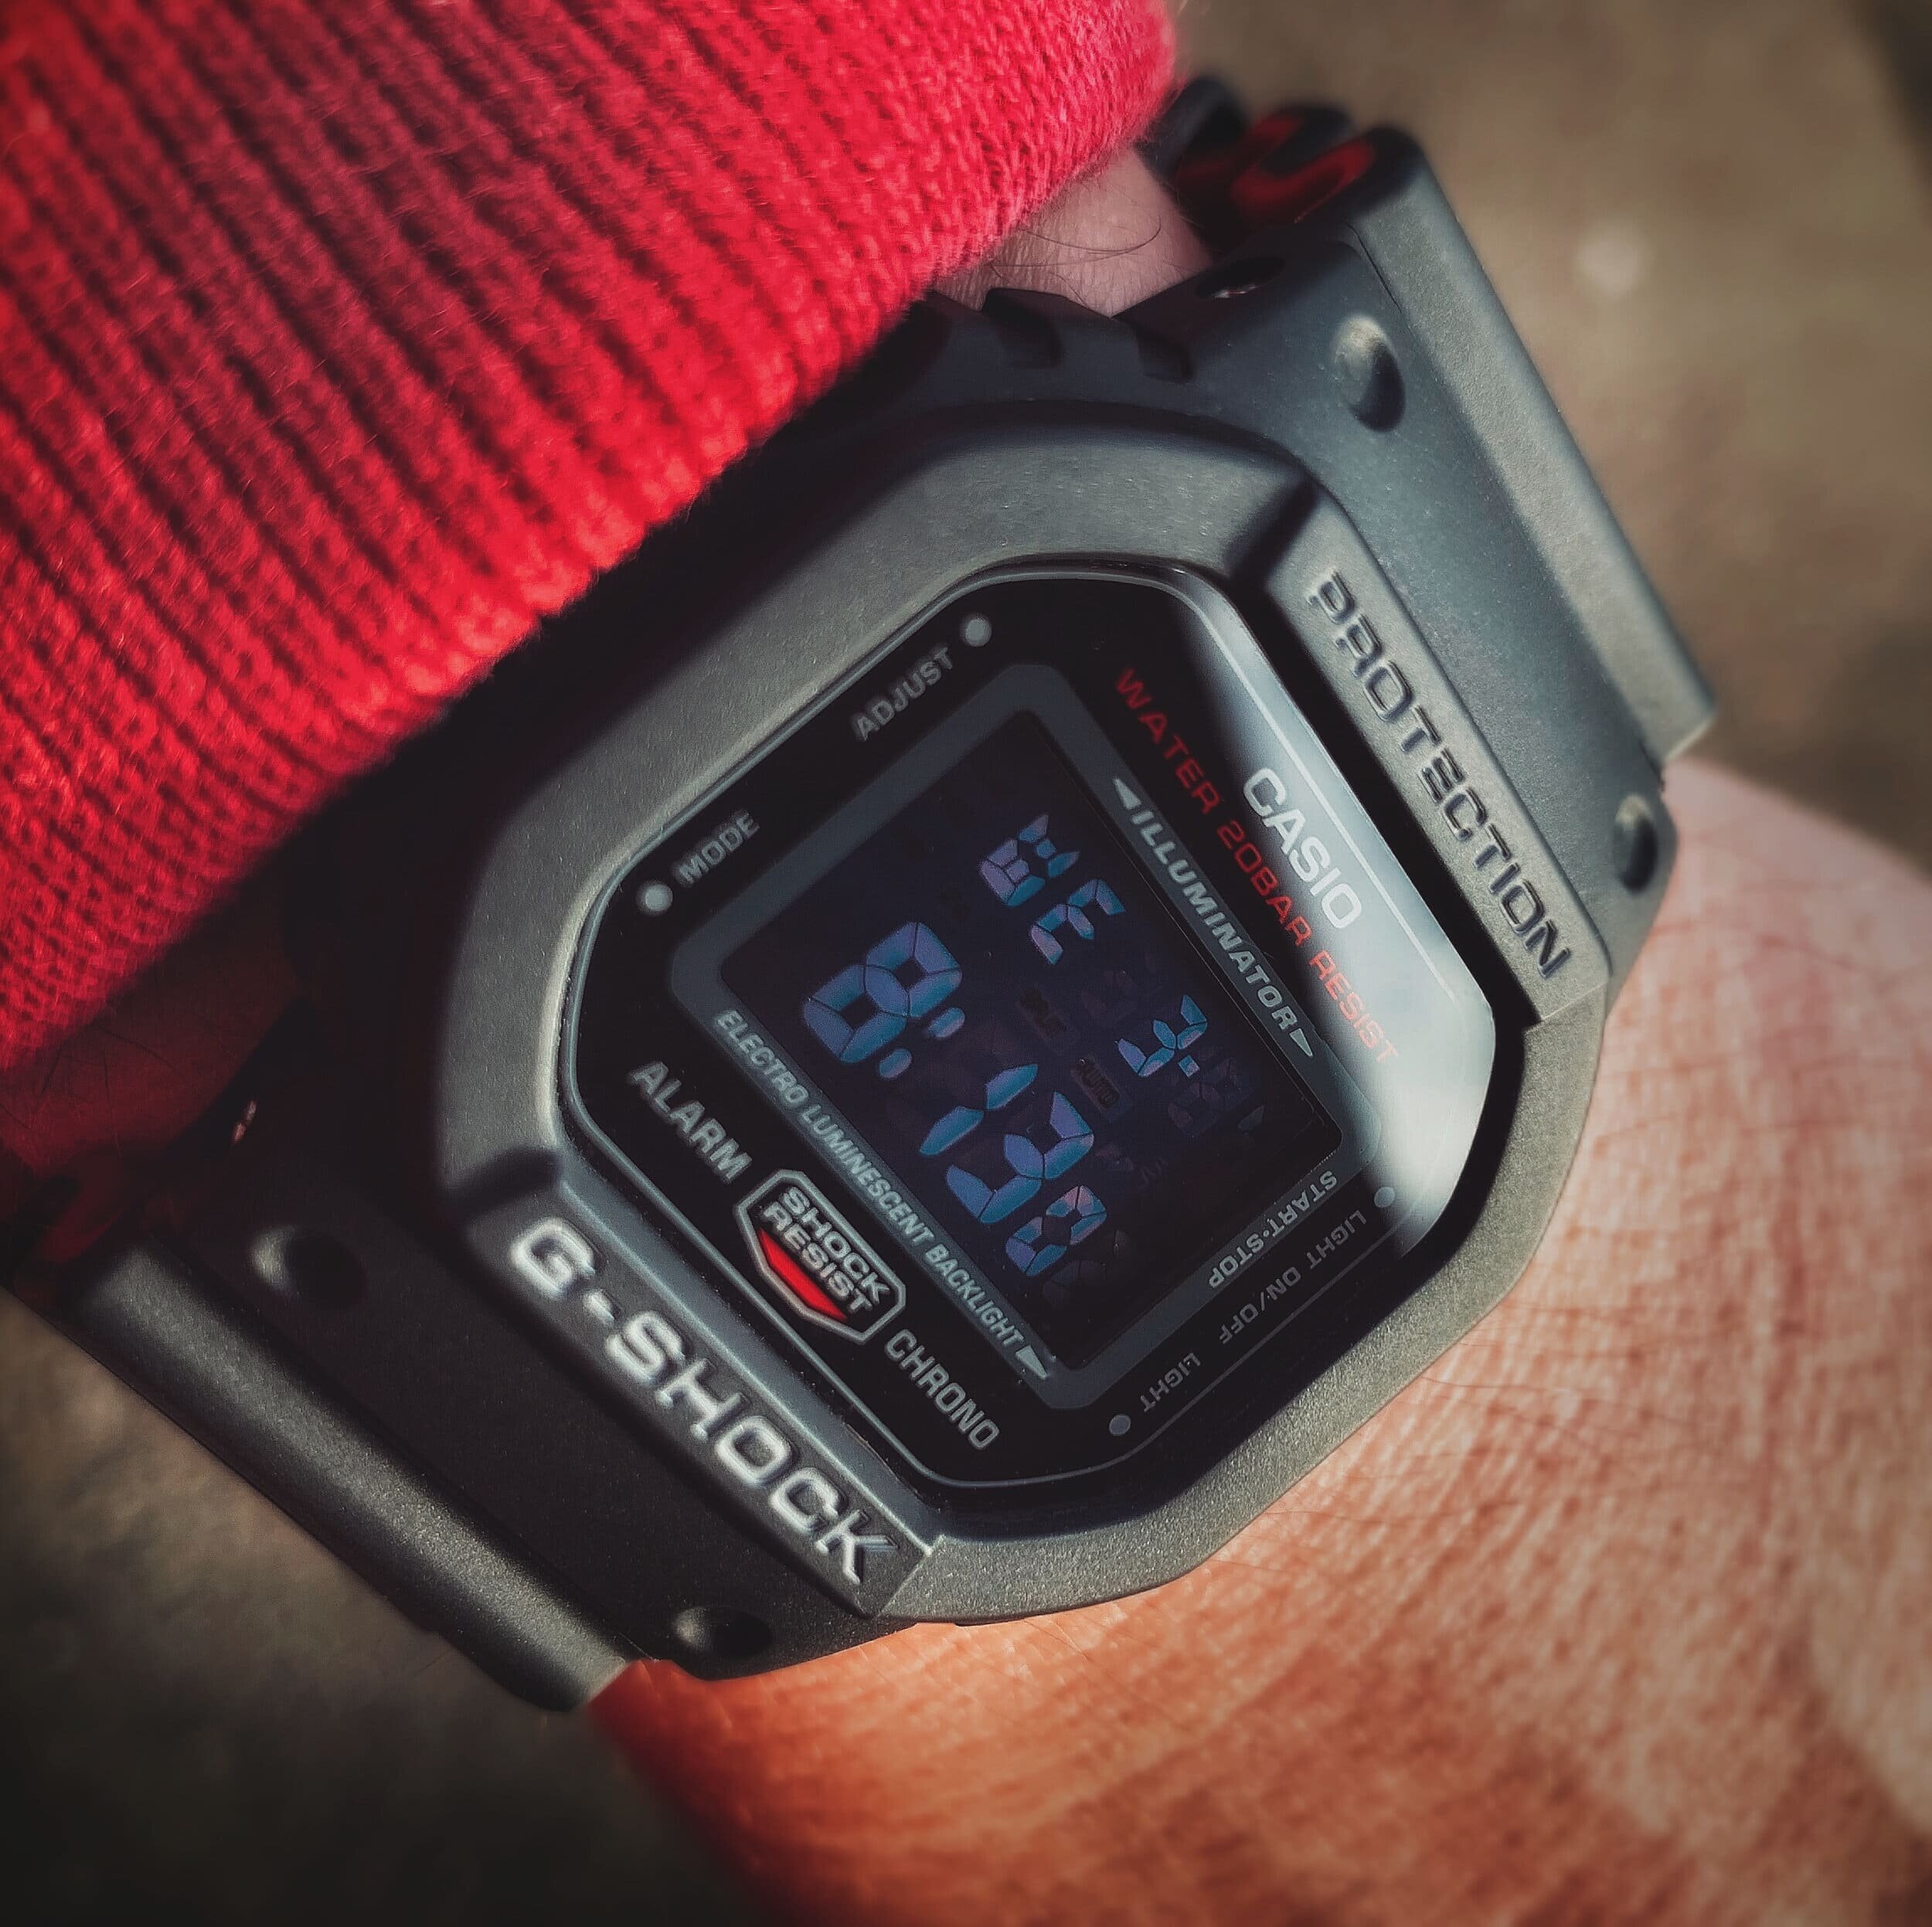 Market? DW5600 the Is MTR Beater Watch Review: G-Shock — It Casio Best Watches on the Watch